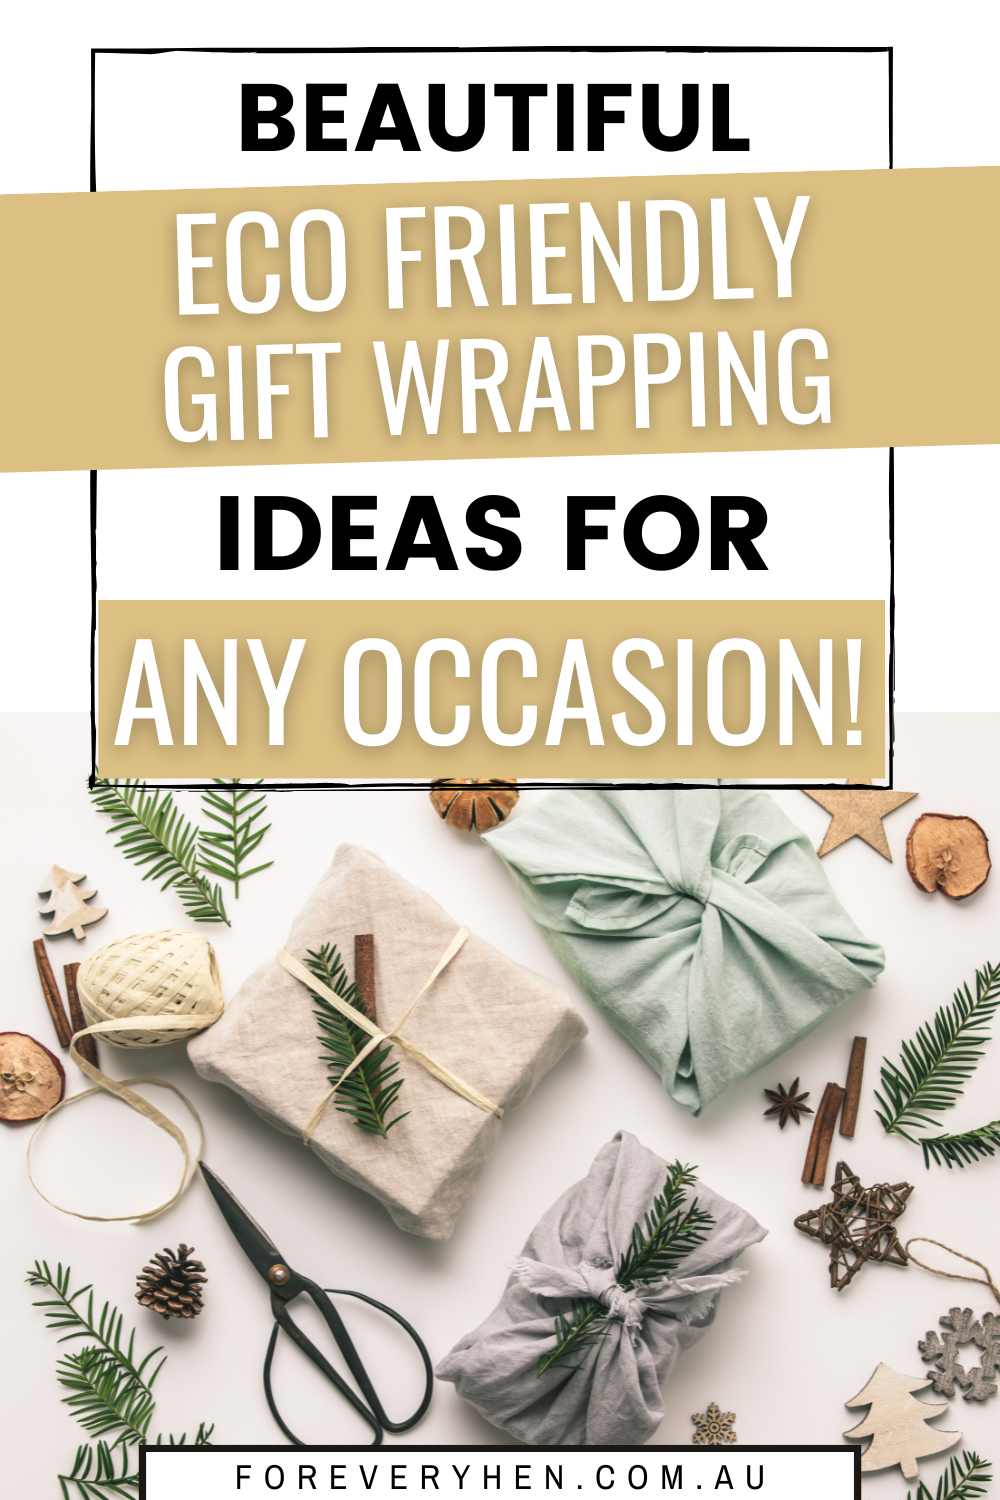 Image of gifts wrapped in fabric. Text overlay: Beautiful eco friendly gift wrapping ideas for any occasion!